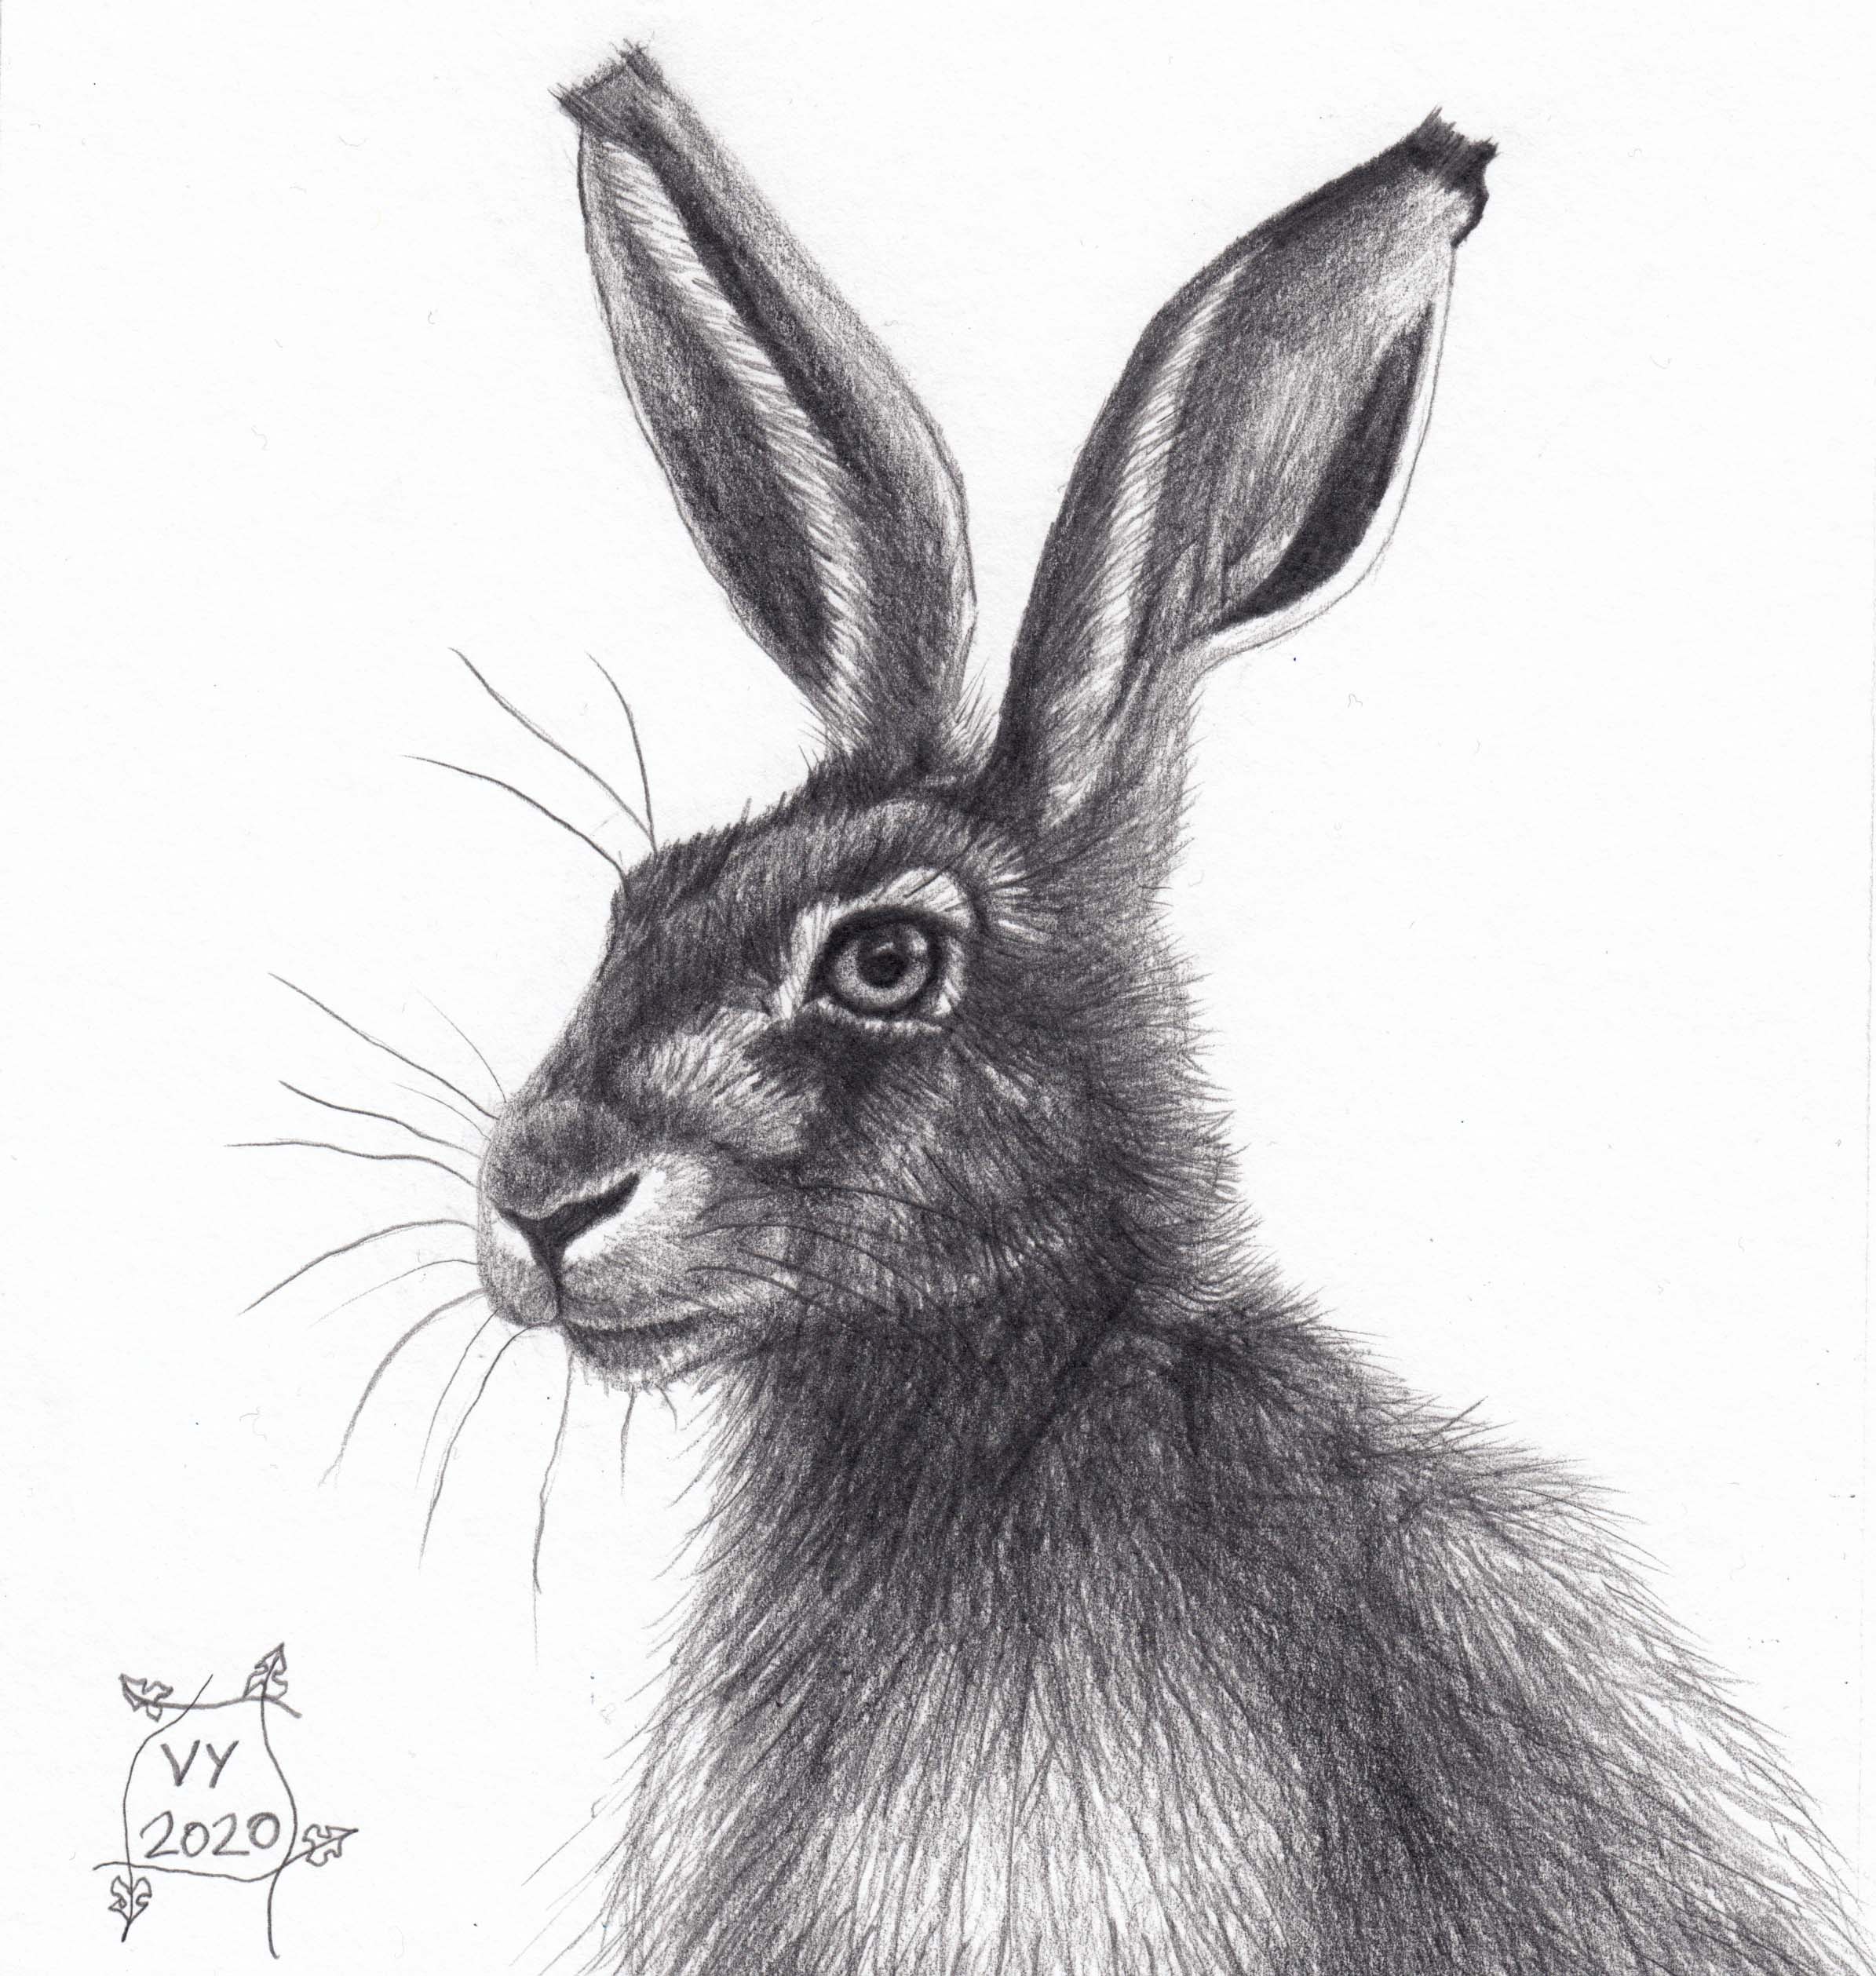 Hare pencil drawing number 2